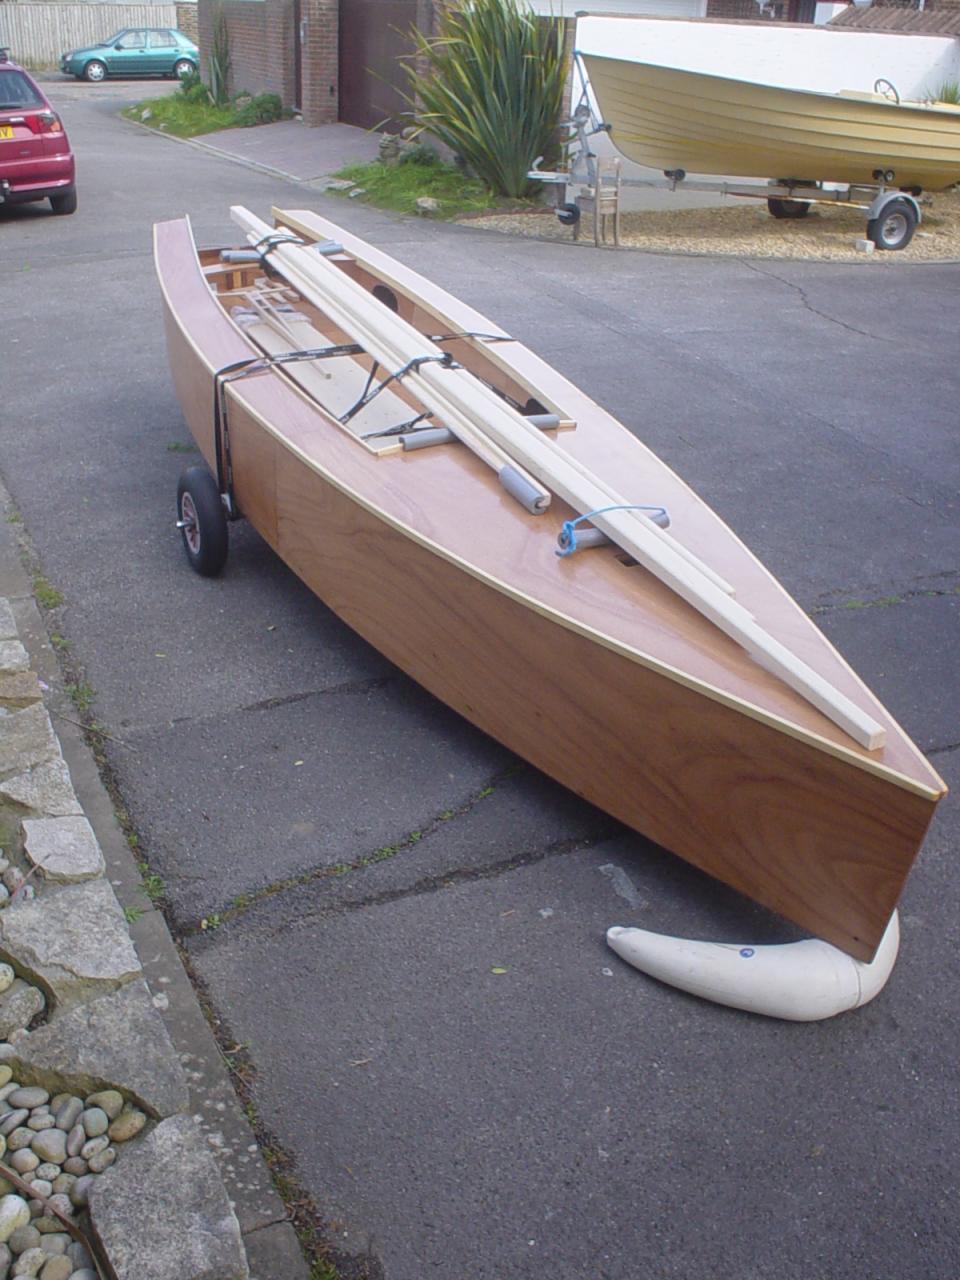  Prototype – Pretty Boat! | Storer Boat Plans in Wood and Plywood